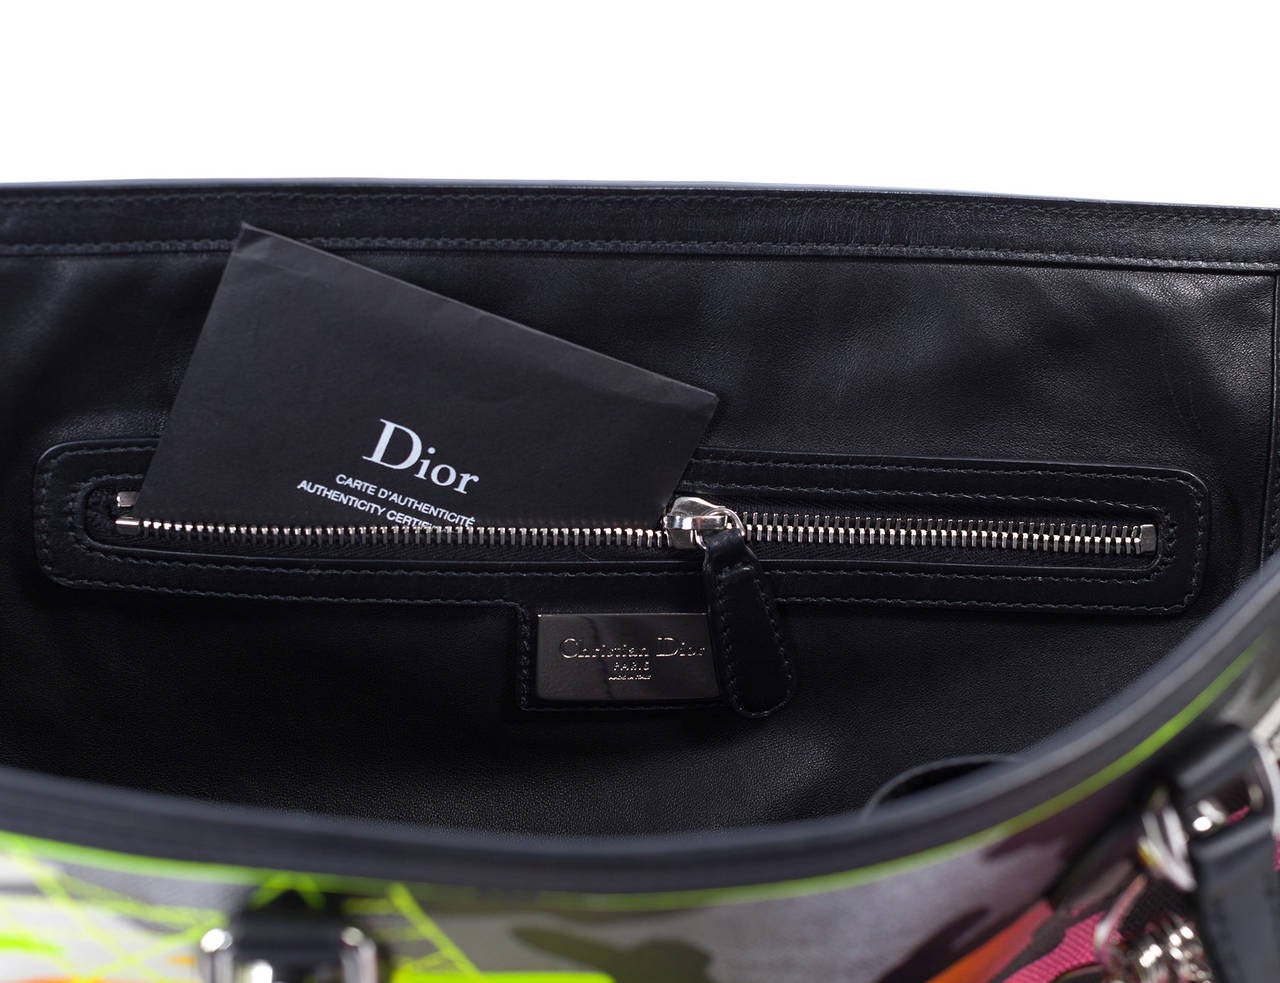 Dior X Anselm Rhyle Neon Camouflage large tote bag from SS 2012 3